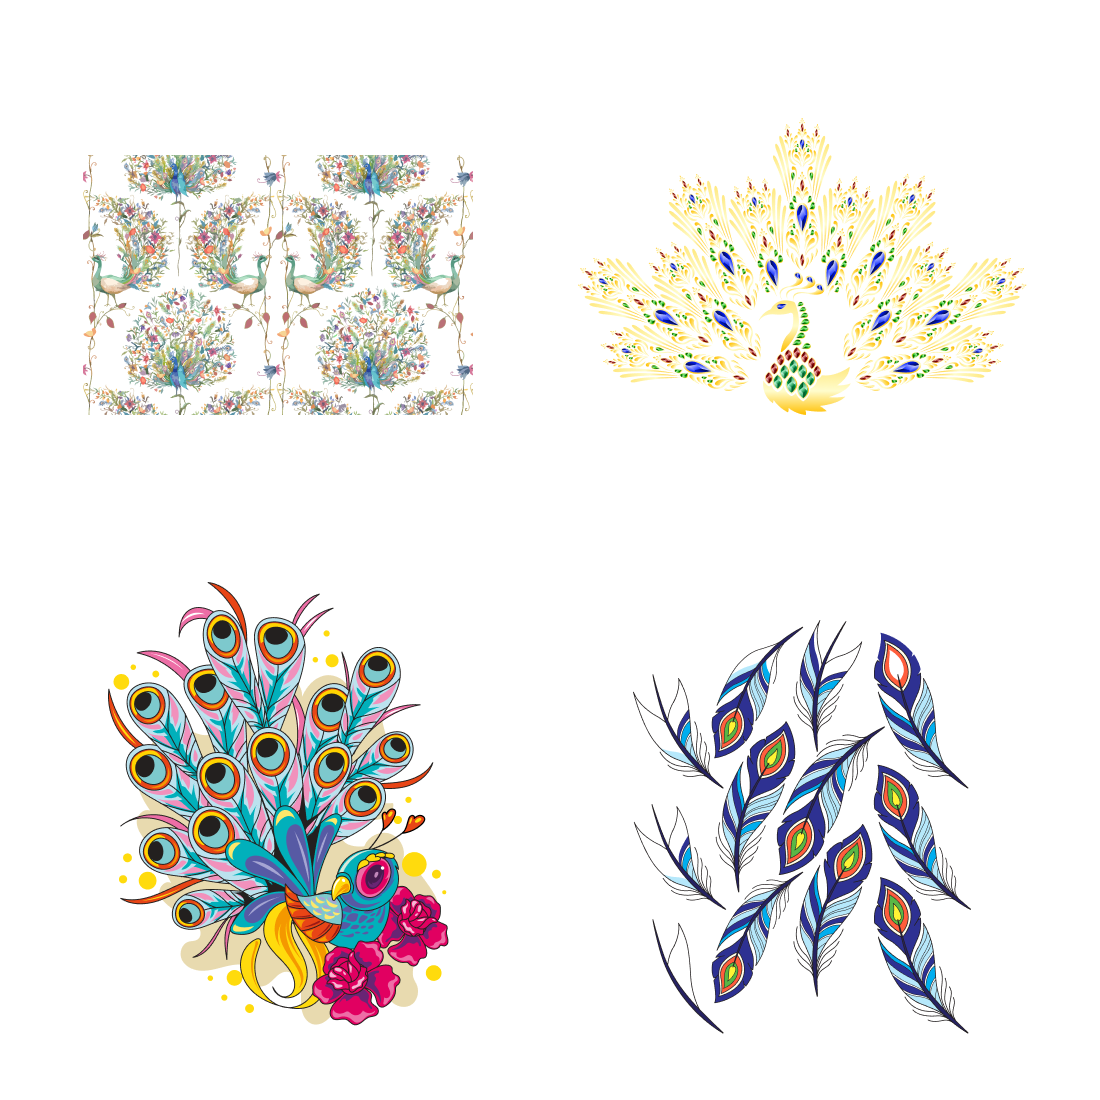 Four different colored designs on a white background.